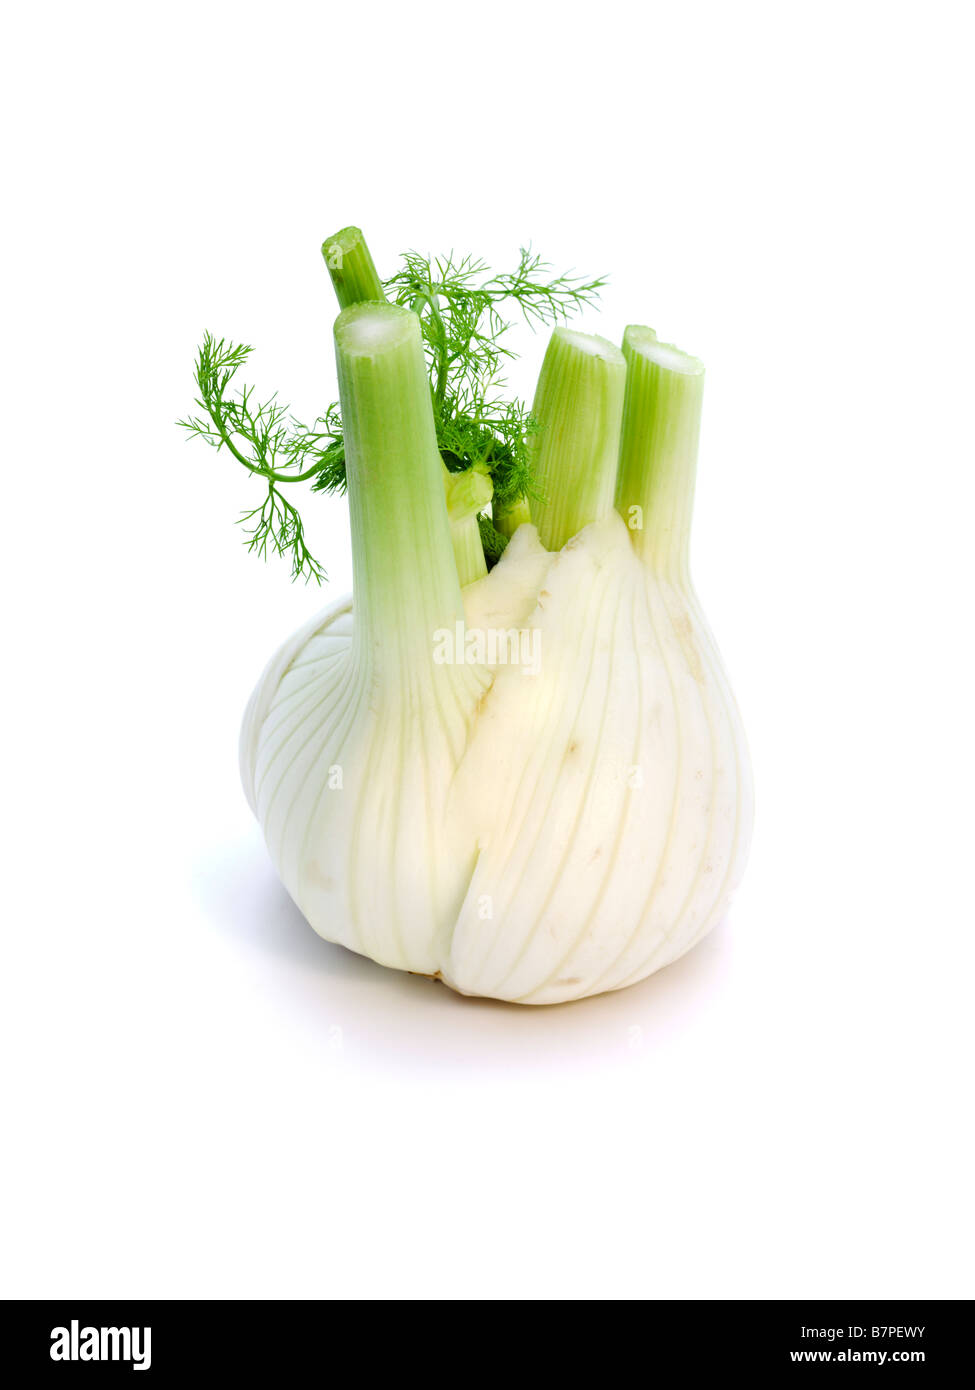 fennel bulb isolated on white background Stock Photo